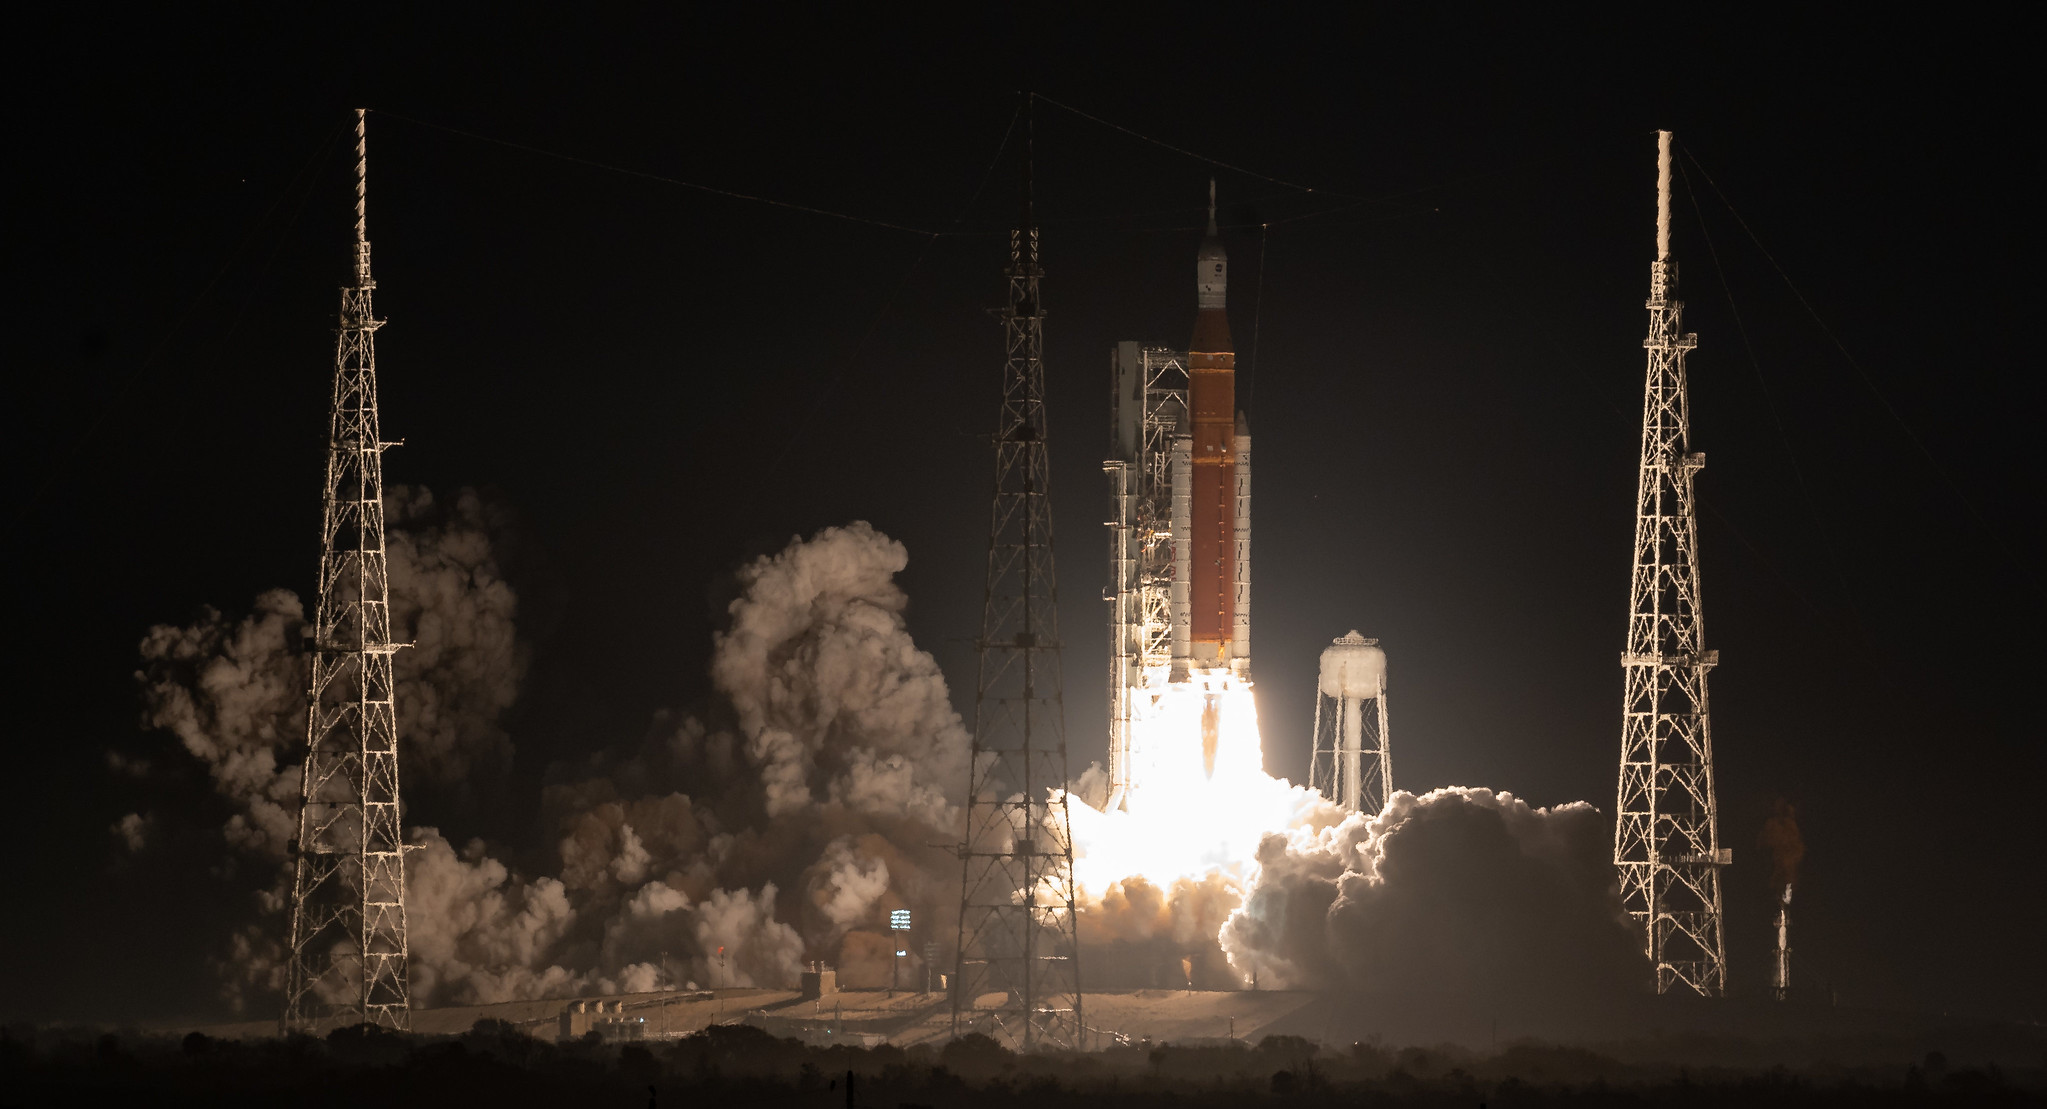 NASA’s Space Launch System rocket carrying the Orion spacecraft launches on the Artemis I flight test